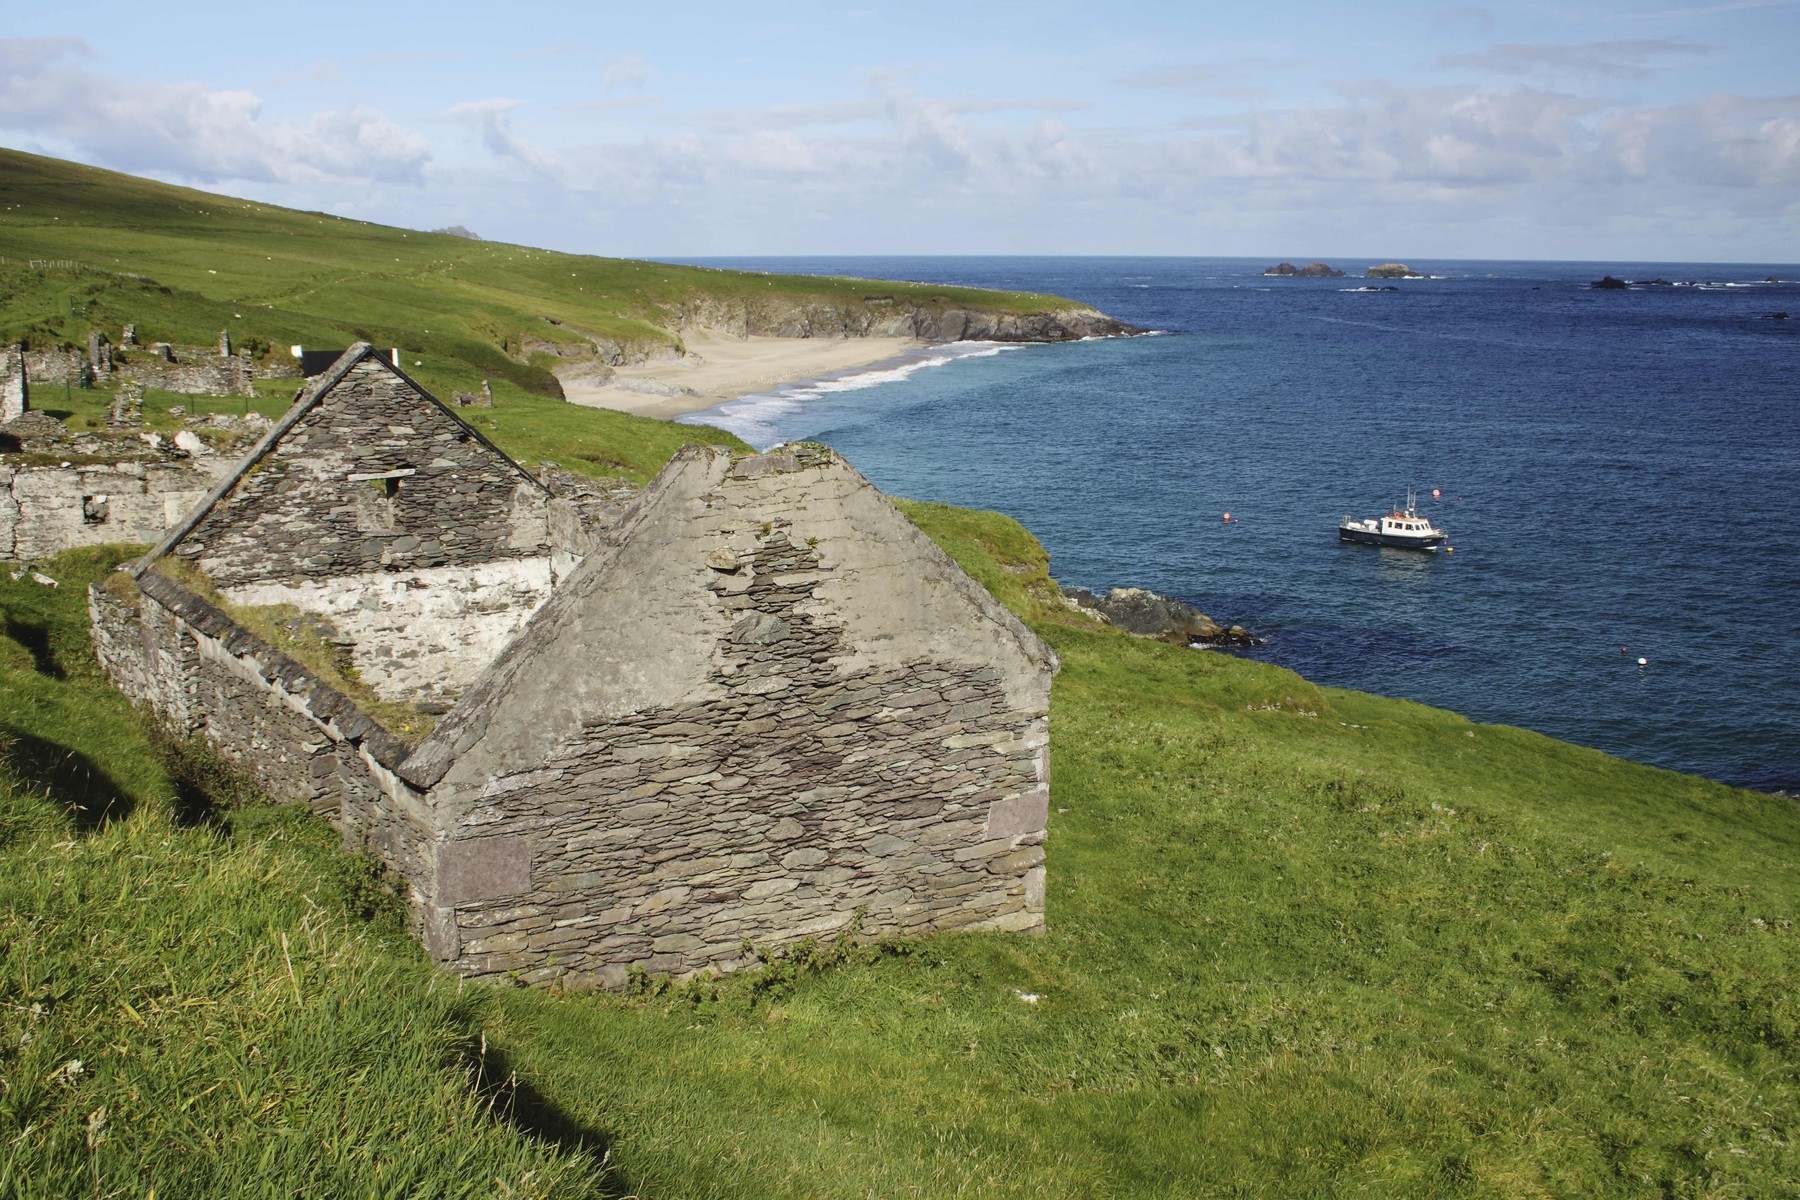 September 17, 2010, Kerry County, Ireland: Ruined Stone Cottages On Blasket Island Along The Coast In Munster Region; County Kerry, Ireland, Image: 492996573, License: Rights-managed, Restrictions: , Model Release: no, Credit line: Trish Punch / Zuma Press / Profimedia